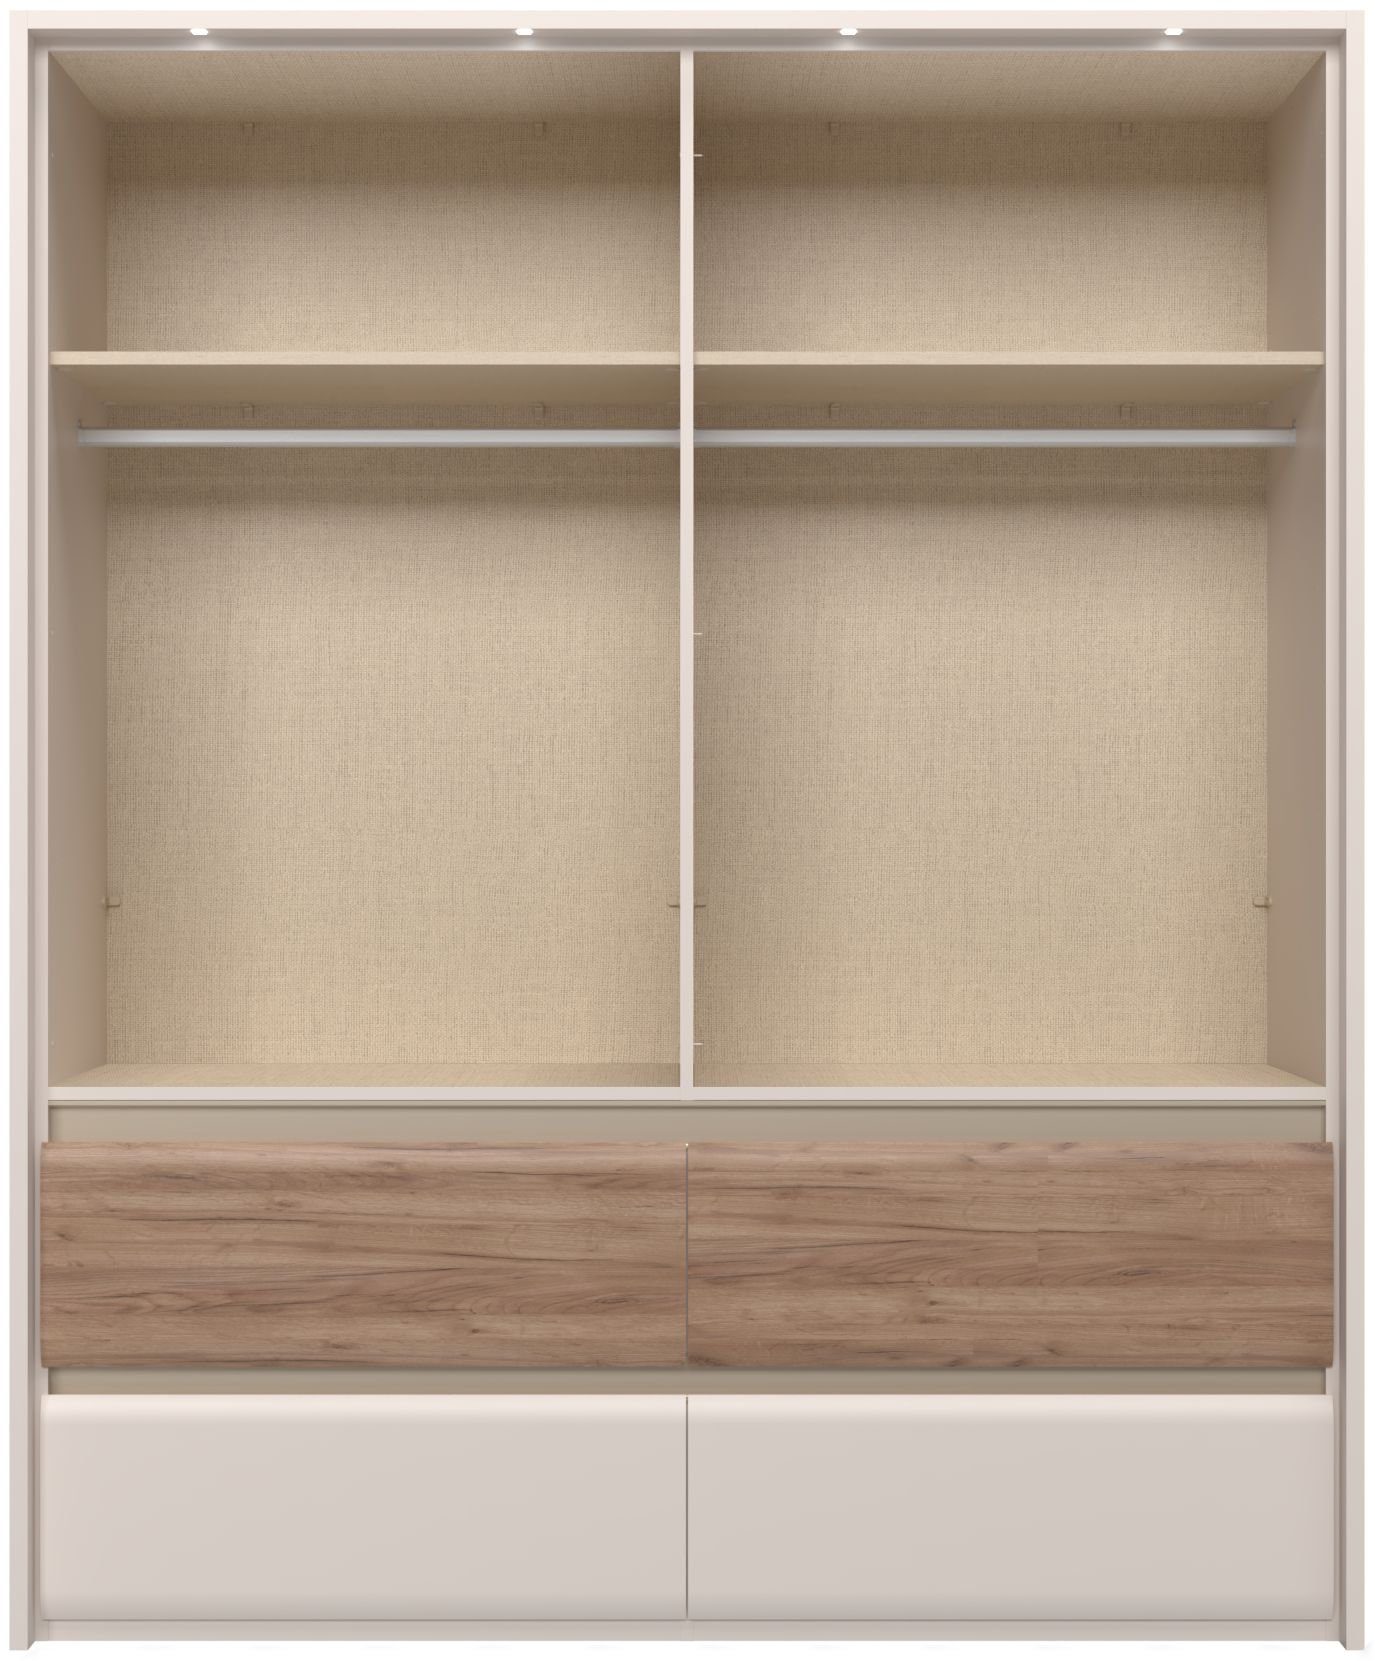 Style Beleuchtung, Funktion Invictus Soft-Close Places LED mit lackiert, of Kleiderschrank UV